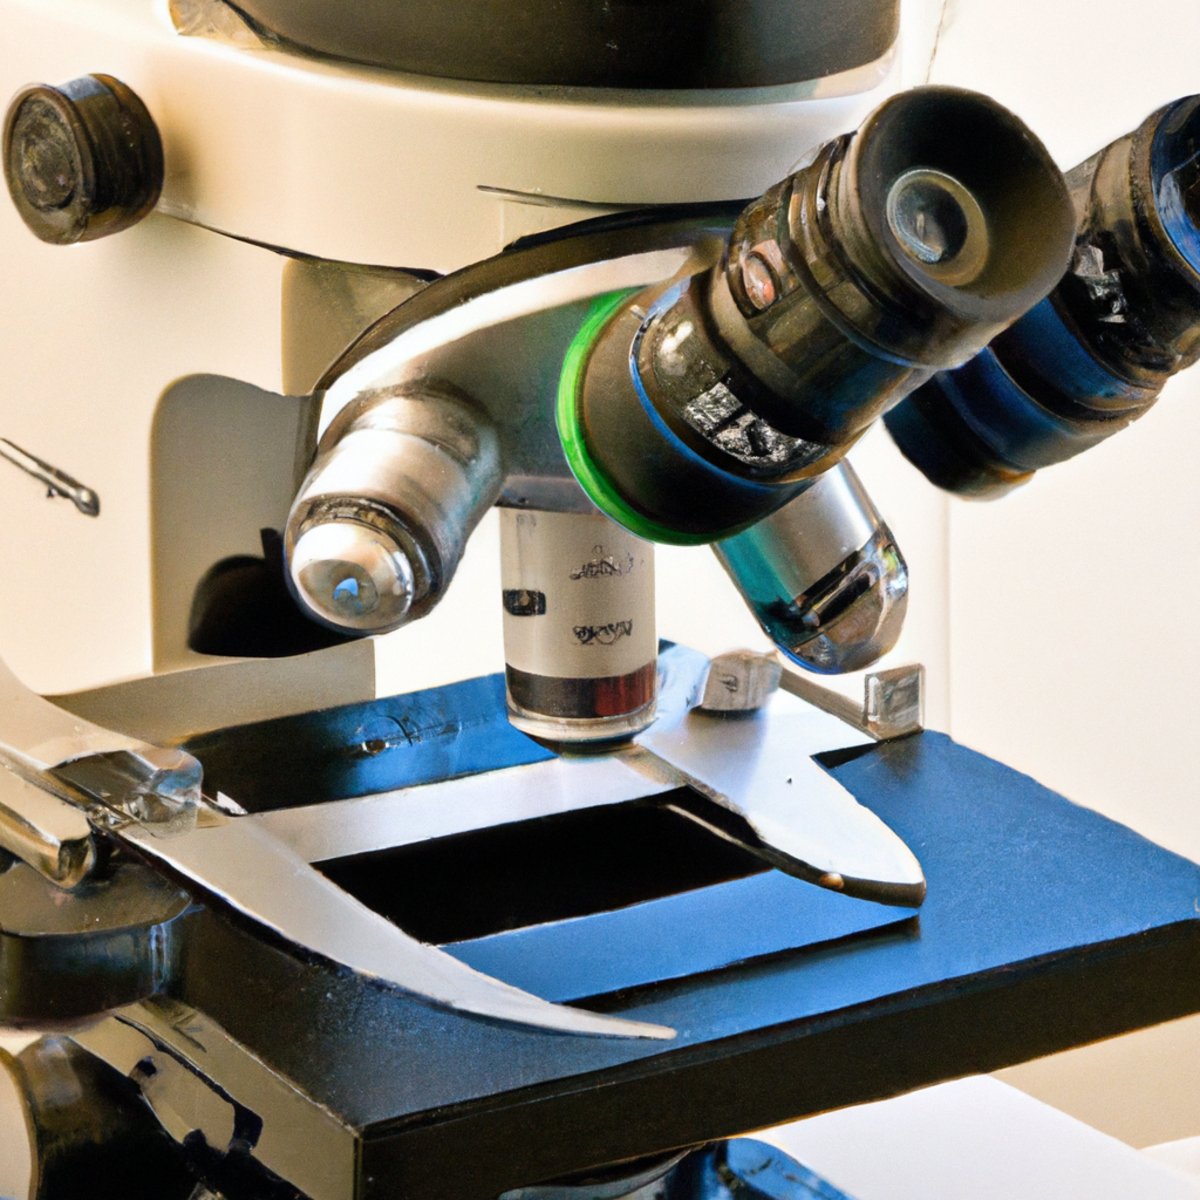 Microscope examining tissue samples for Proteus Syndrome research.